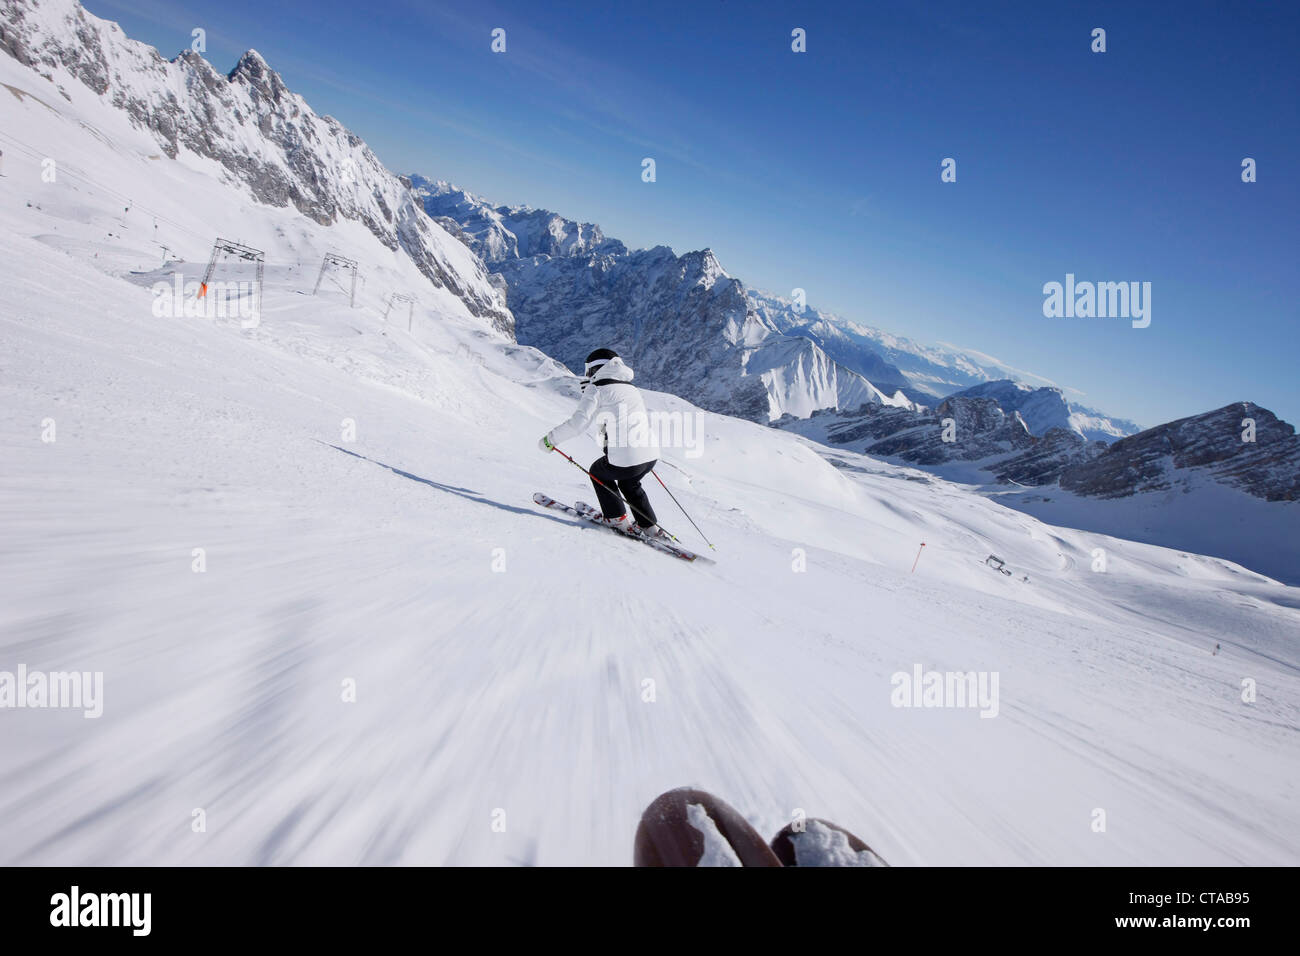 Skier descending down Weisses Tal, View over the plateau, Zugspitze, Upper Bavaria, Bavaria, Germany Stock Photo